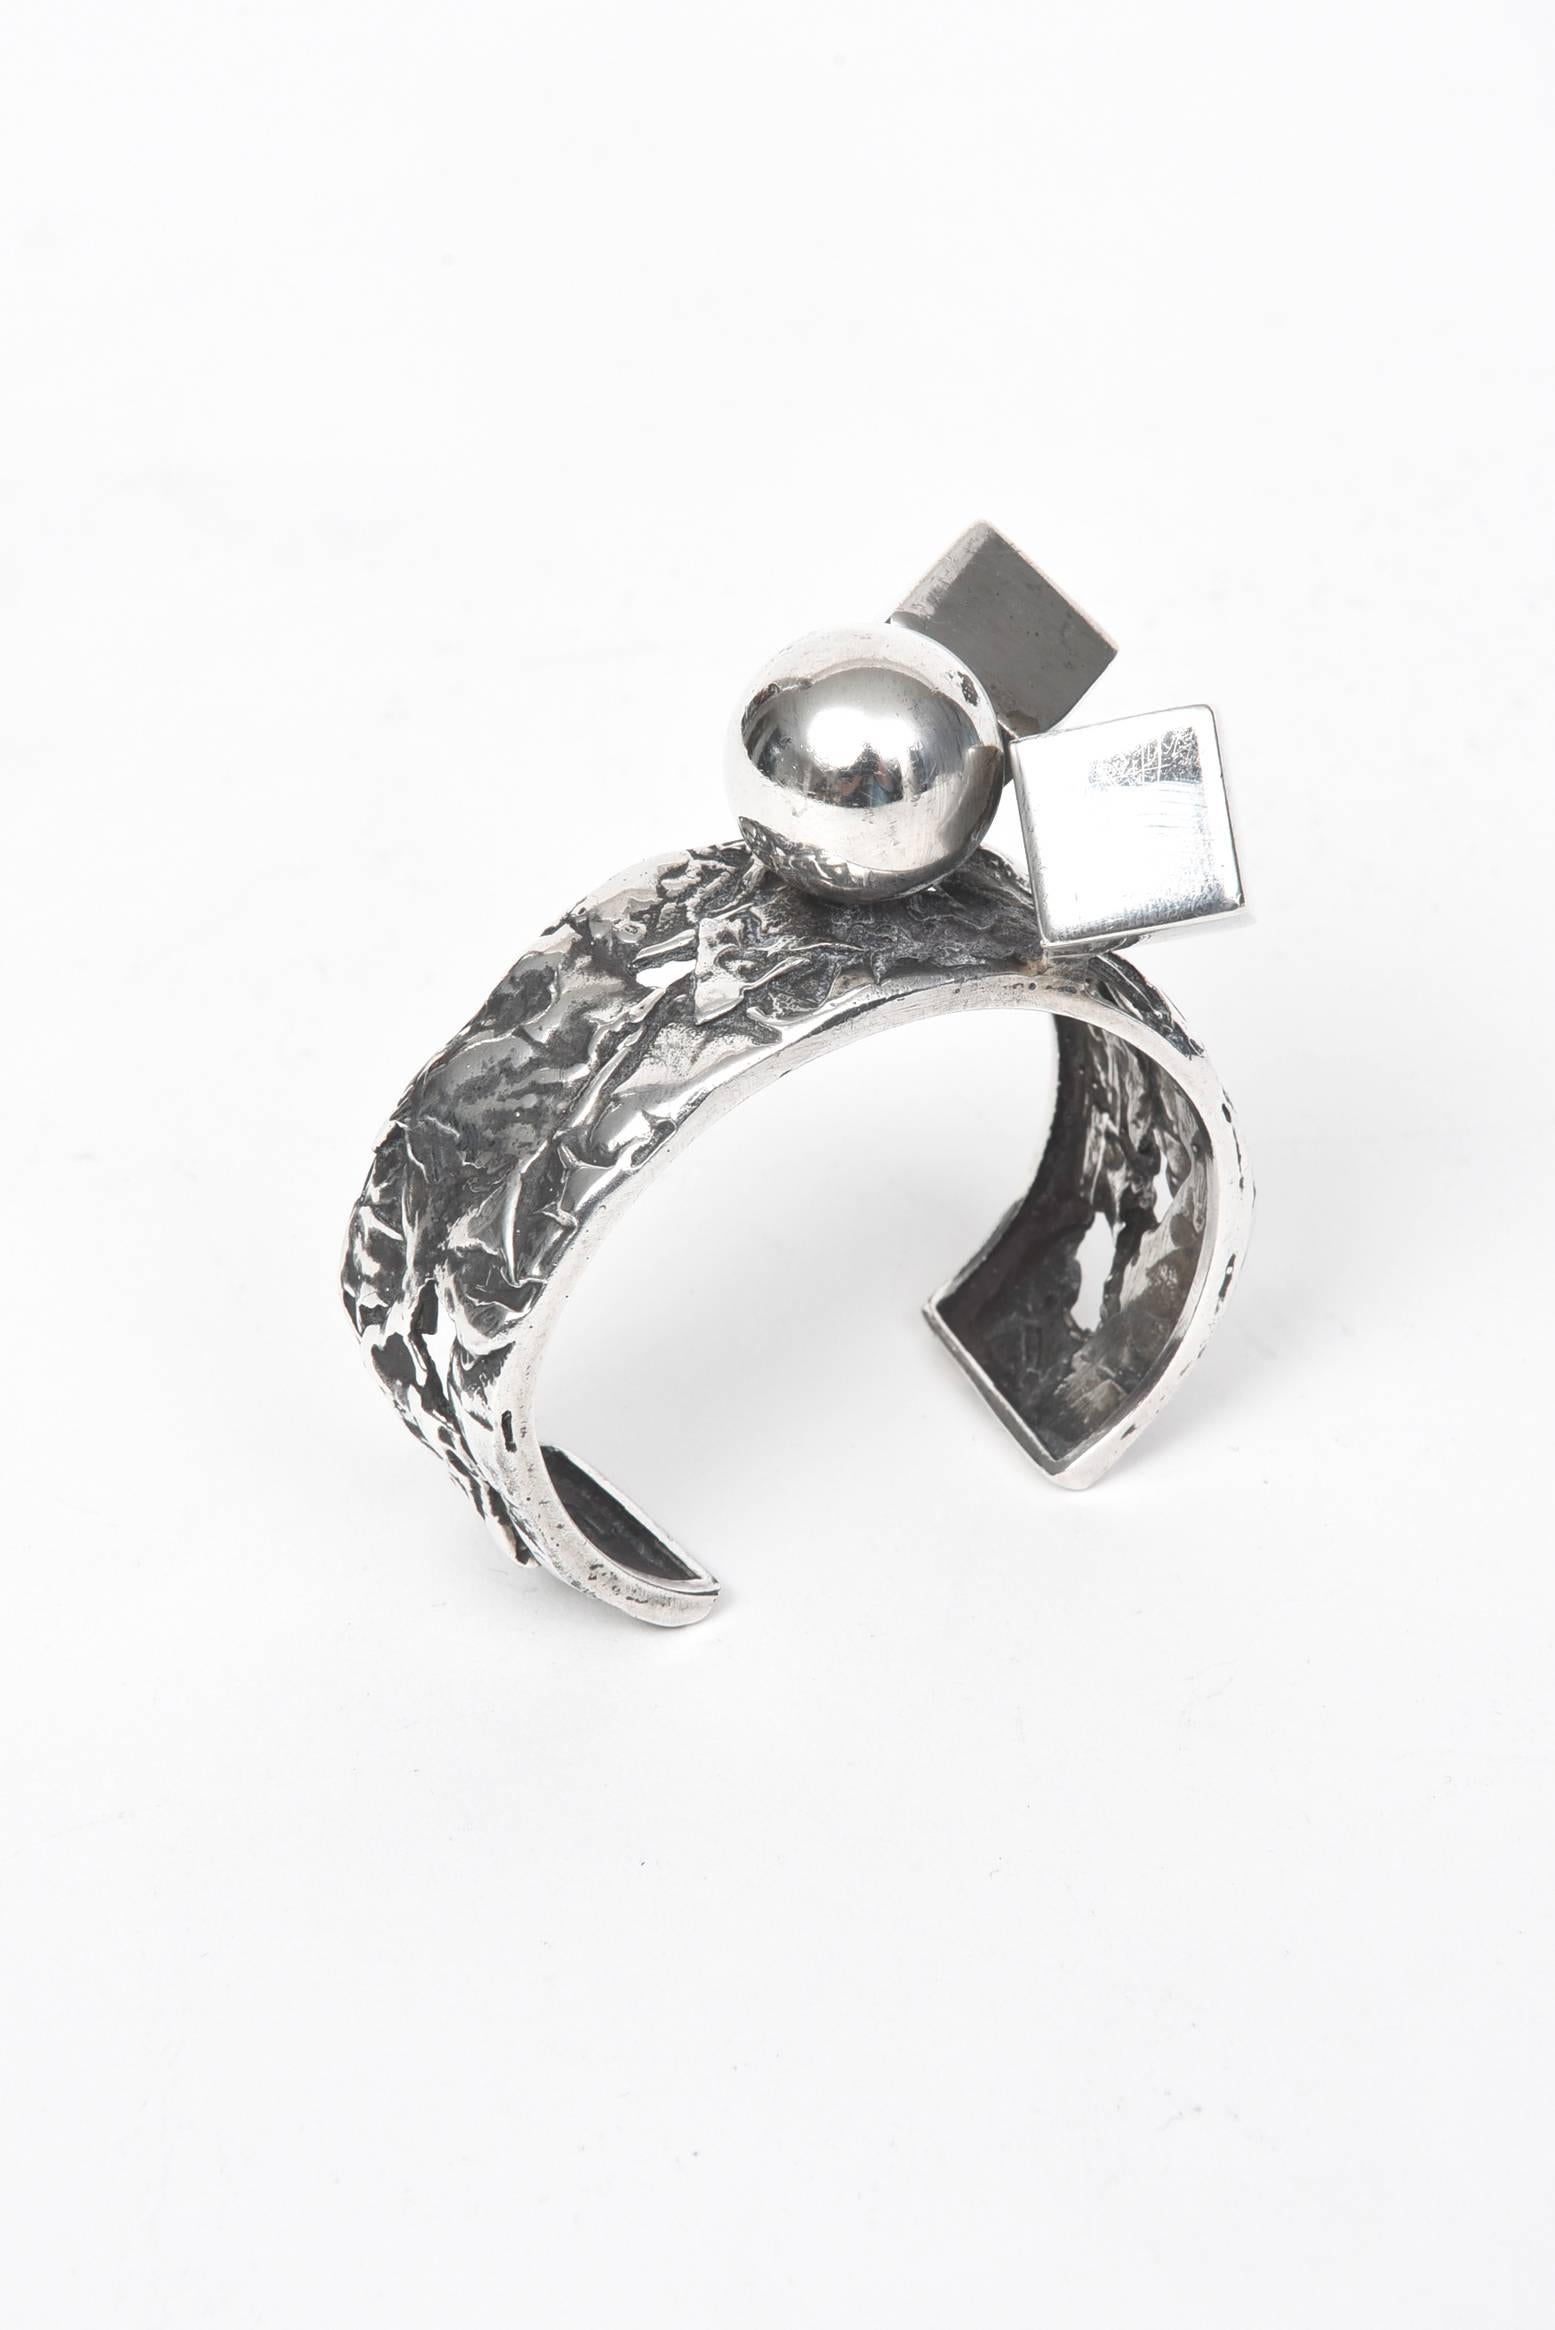 A wide, handmade sterling cuff with ball & cube accents by Israeli designer, Rachel Gera.  Rachel Gera's silver jewelry has adorned leading celebrities. She creates three-dimensional silver work, which has won international acclaim.

Her